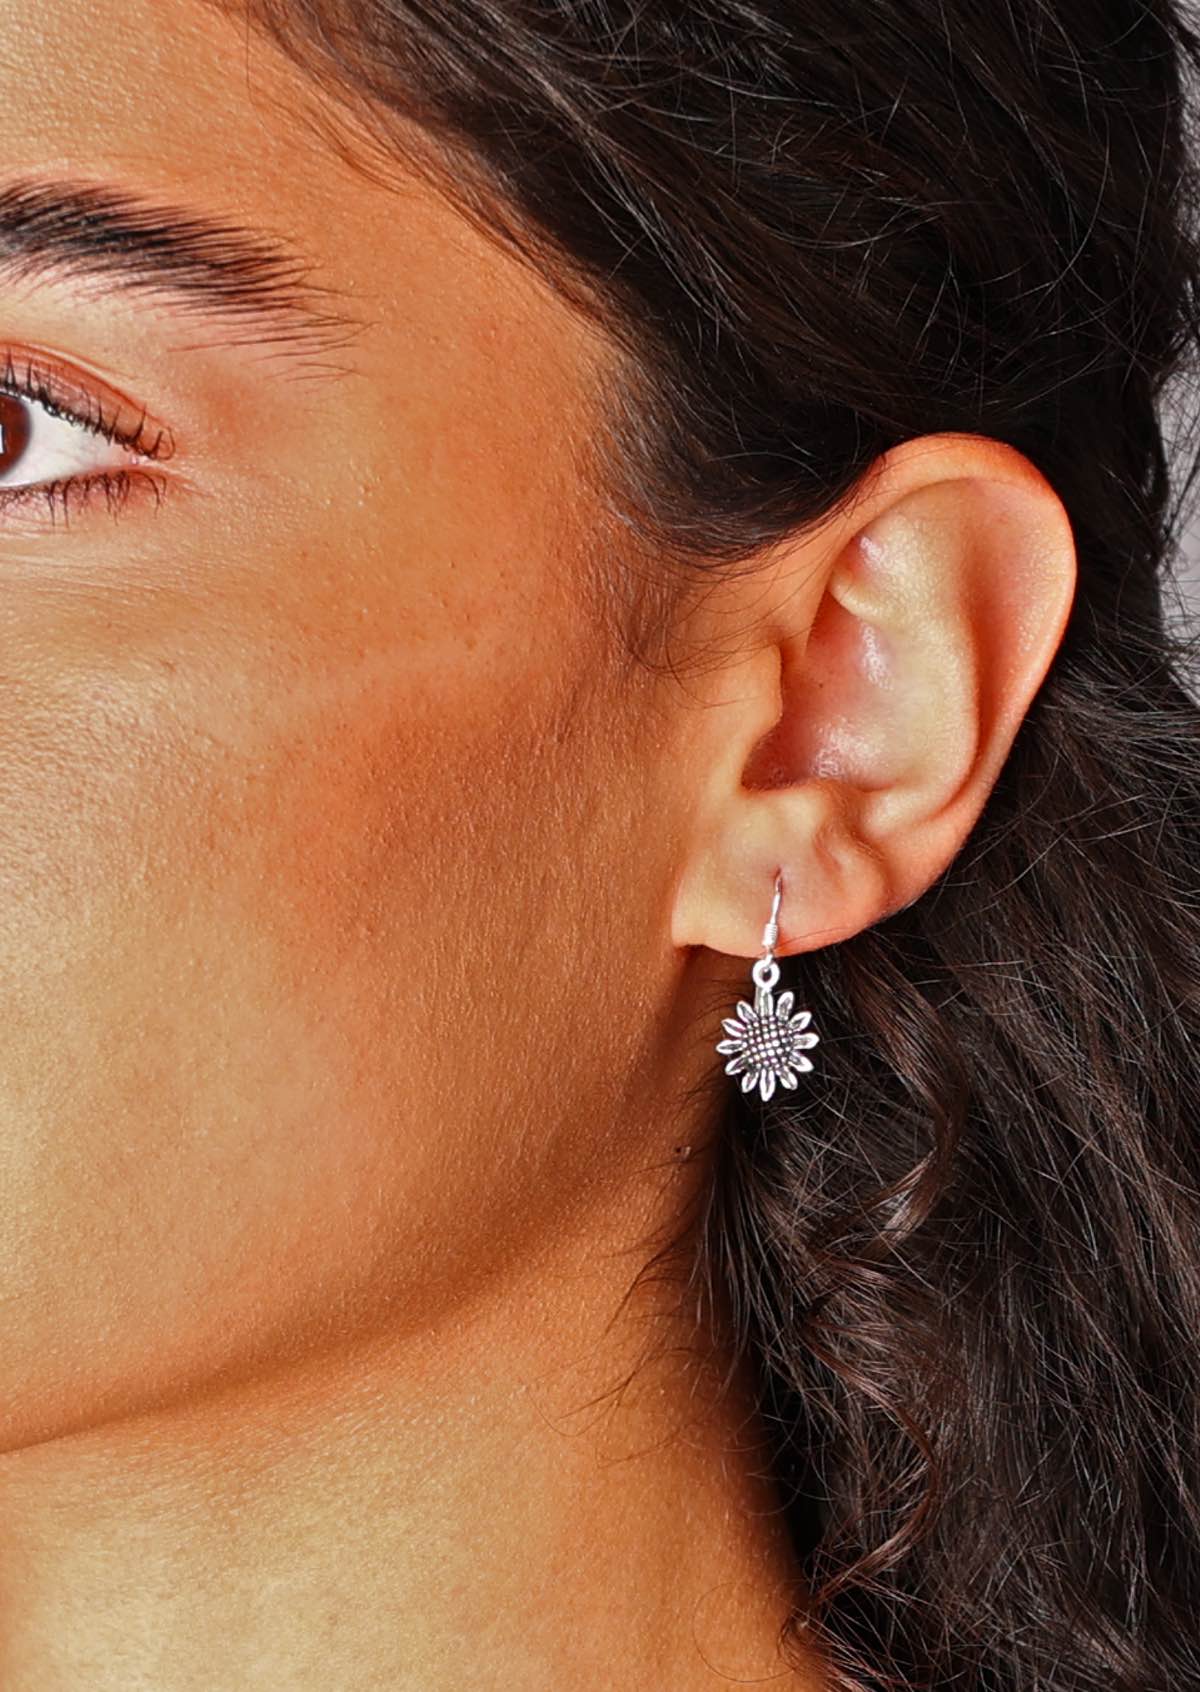 Follow the sun with these sweet silver Sunflower earrings